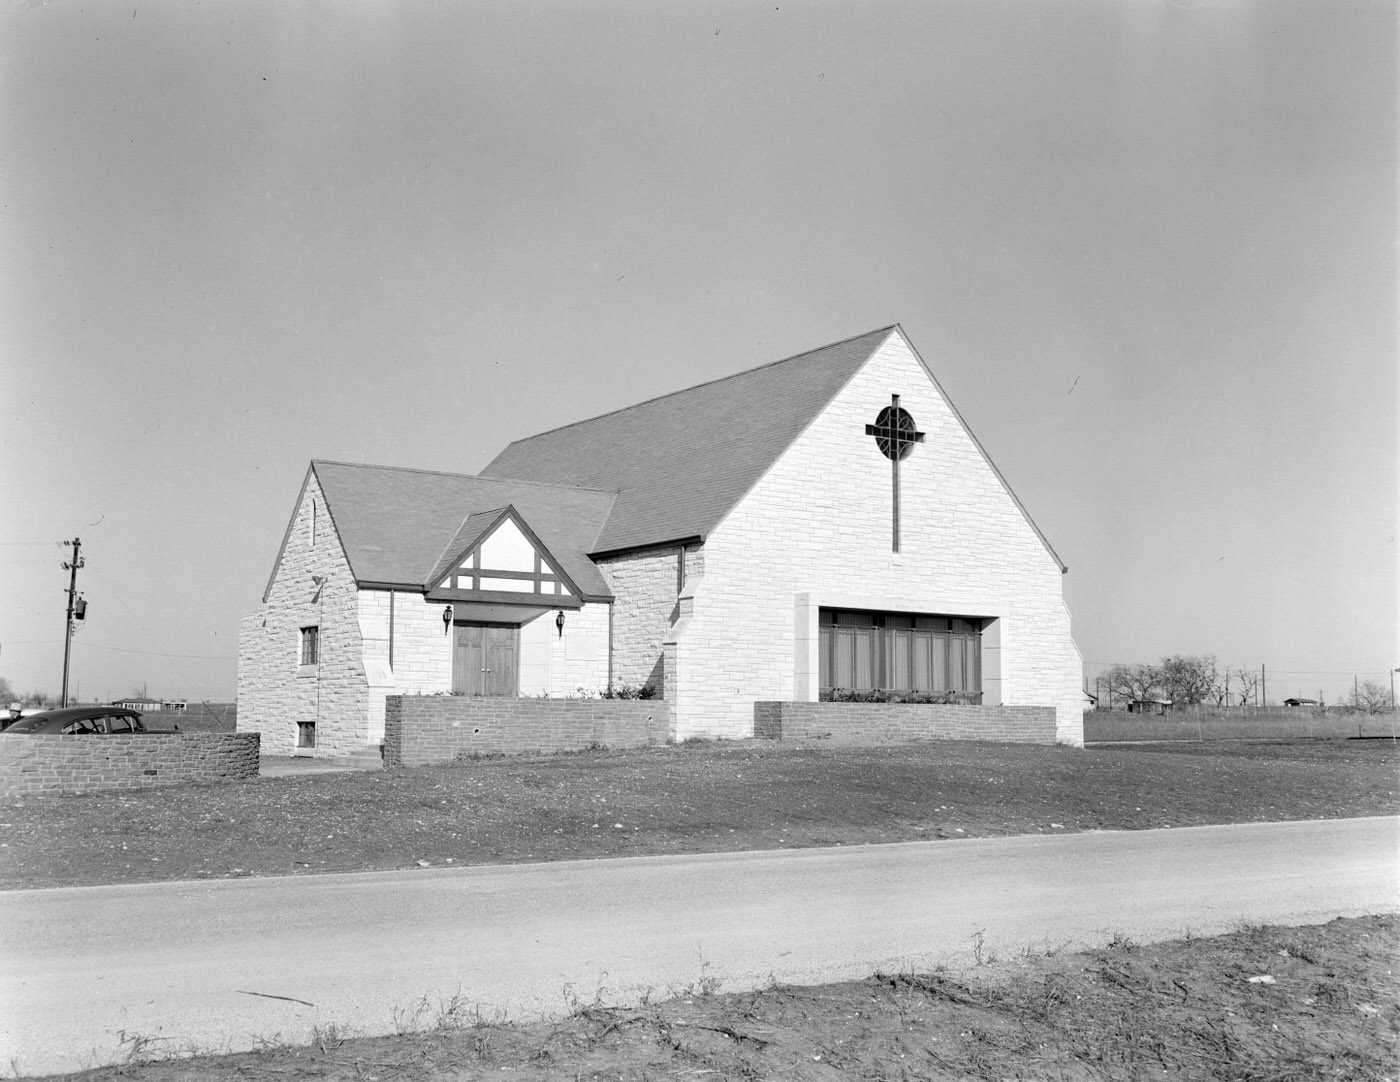 St. Louis Catholic Church with Stained Glass Cross, 1955.